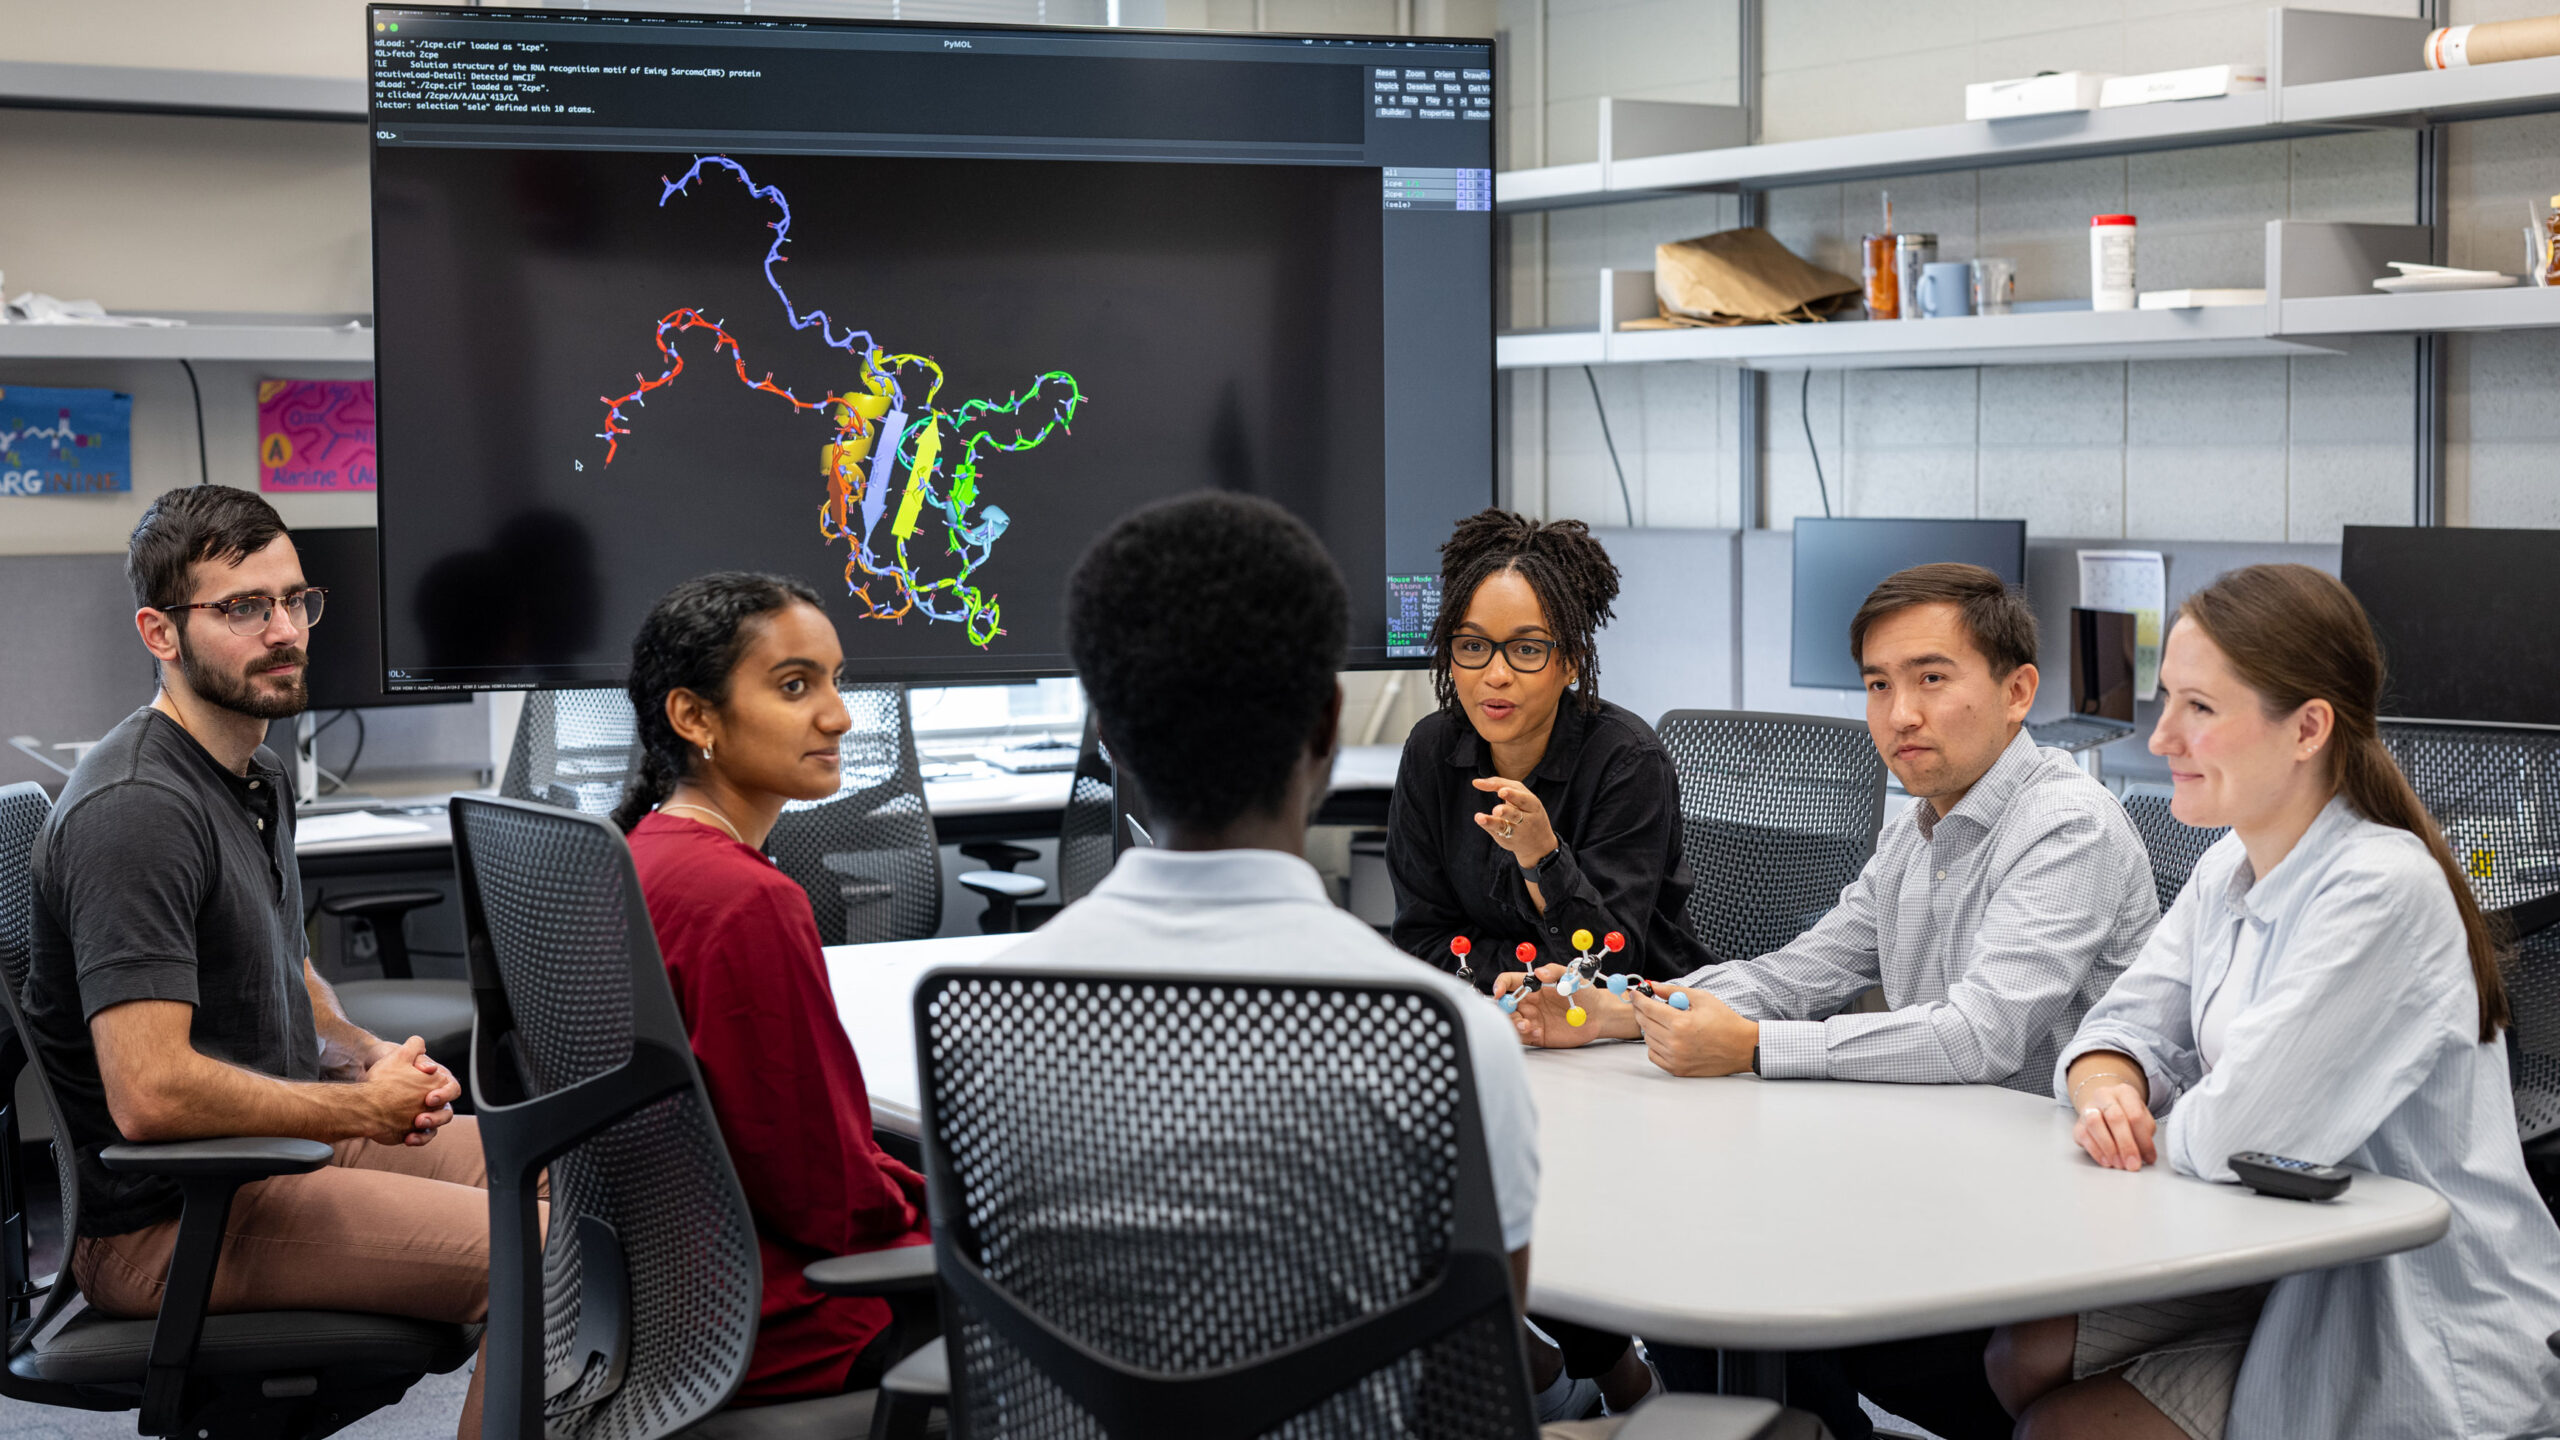 A group of six researchers sits around a table and discusses molecular models, which are visible on a screen behind them and in physical form on the table.